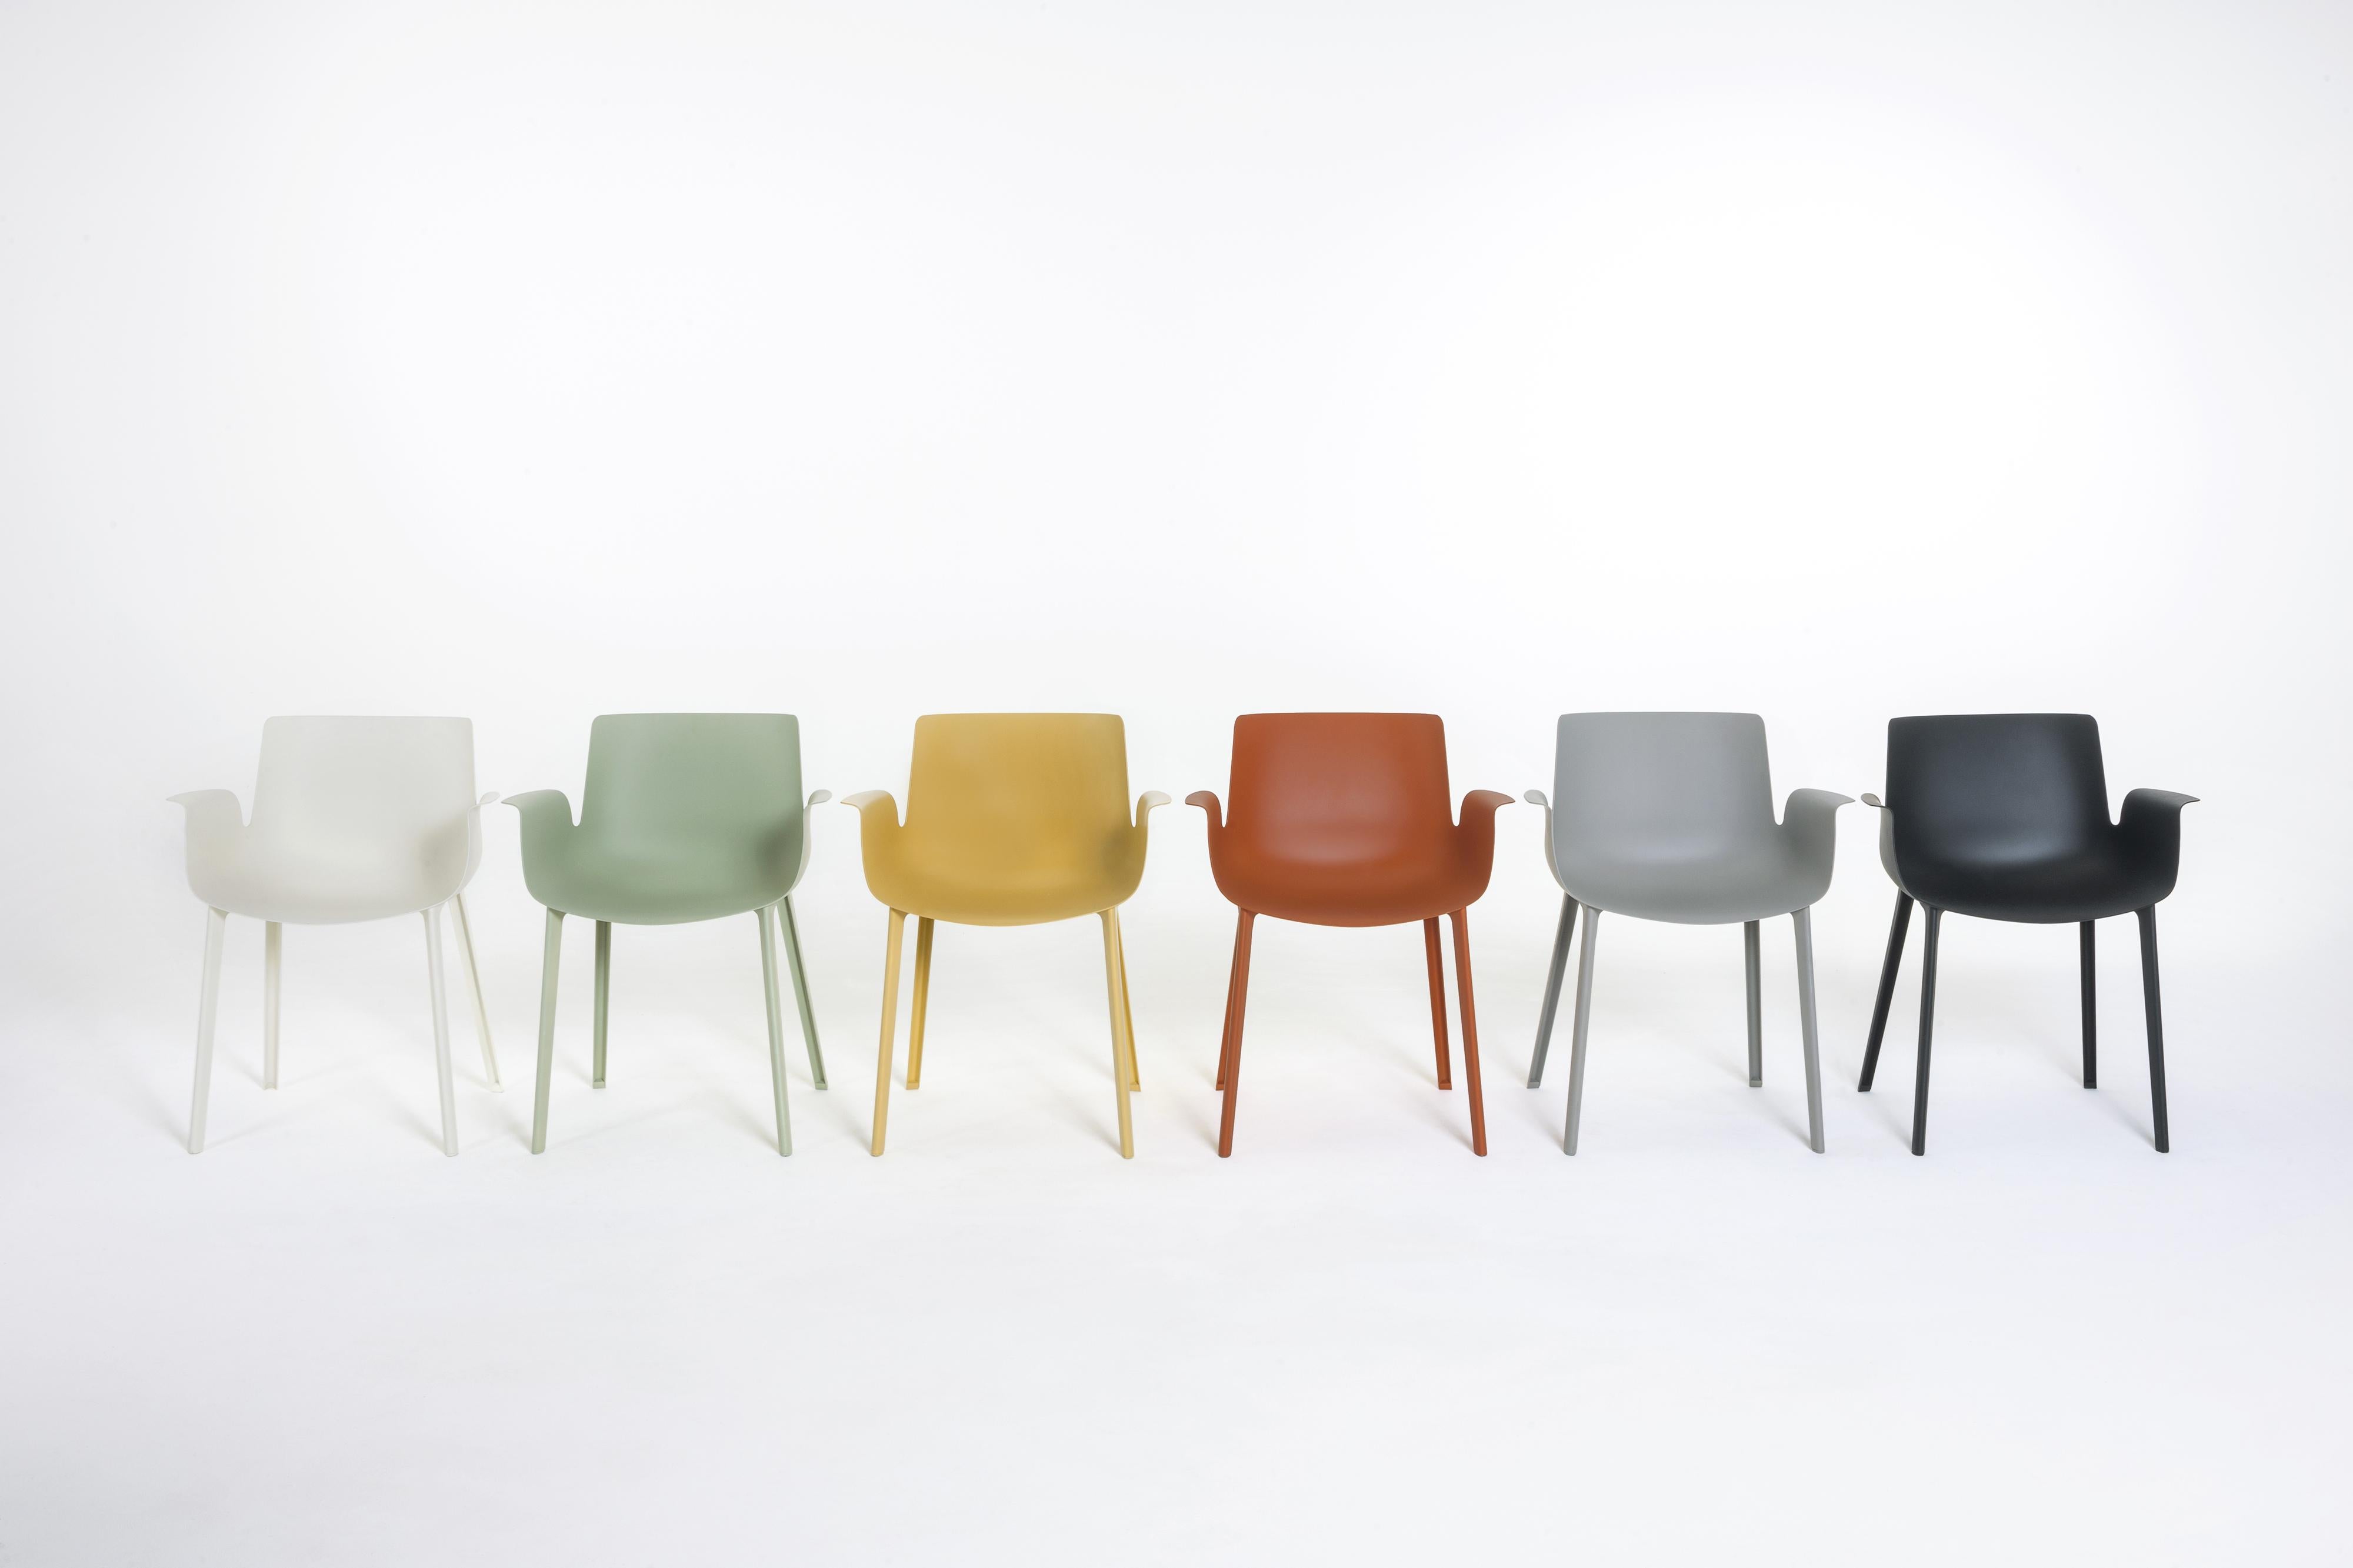 Kartell Piuma Chair in Sage by Piero Lissoni In New Condition For Sale In Brooklyn, NY